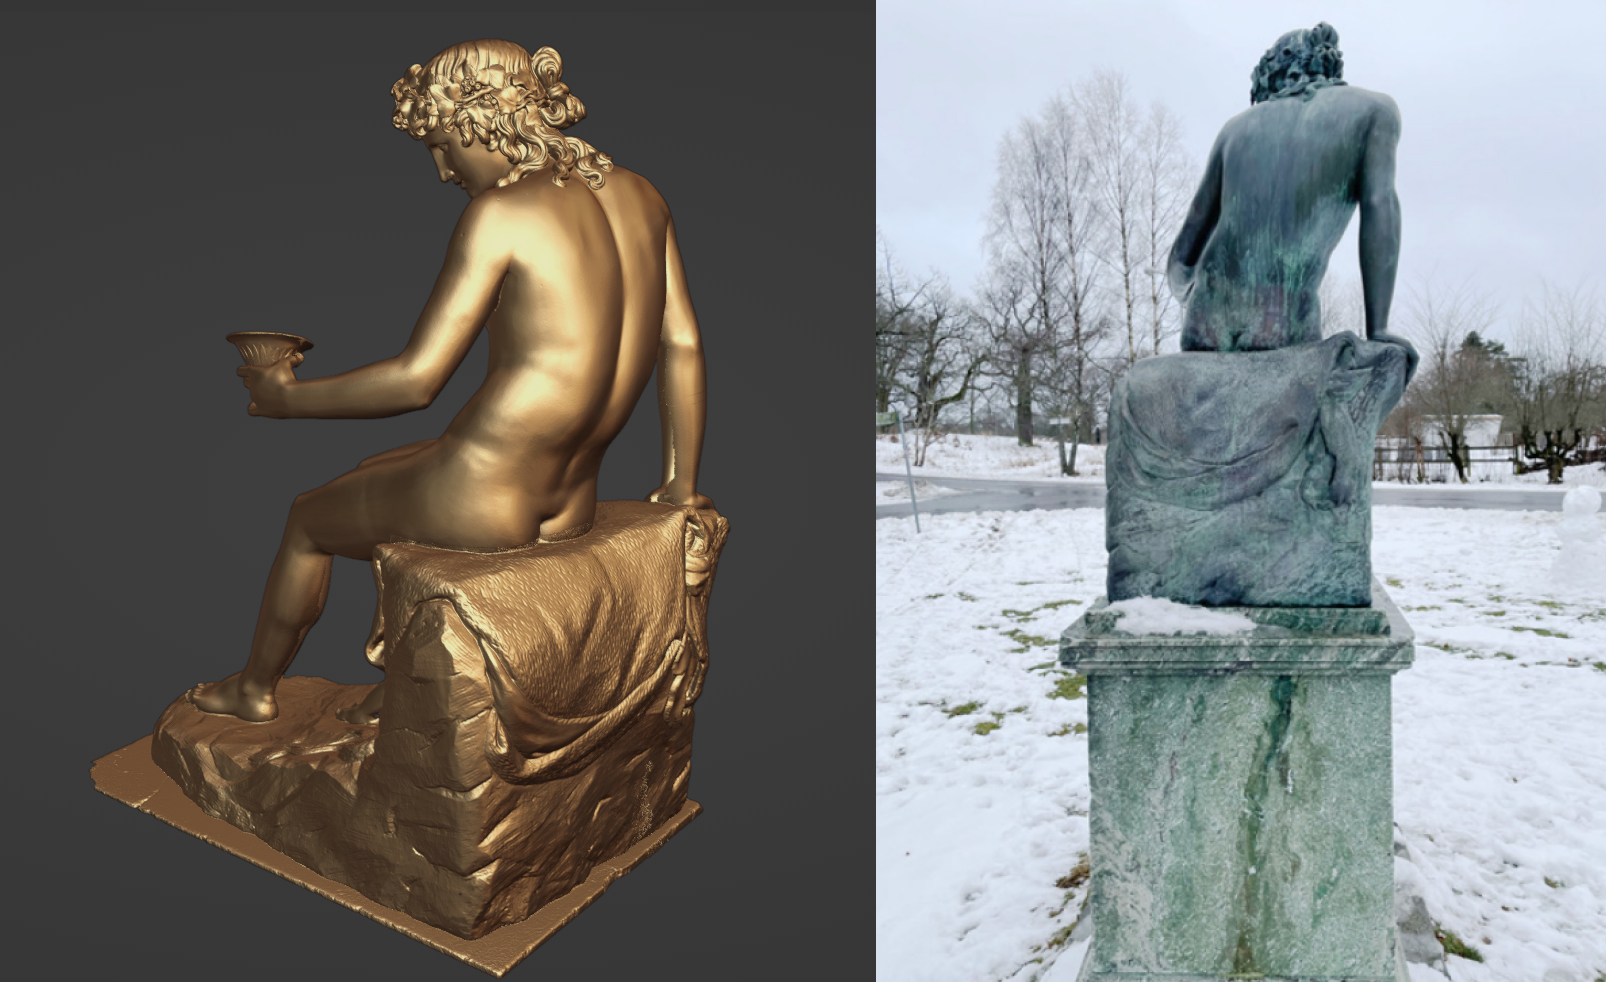 3D scanned result vs. the real-life version of one of the sculptures.